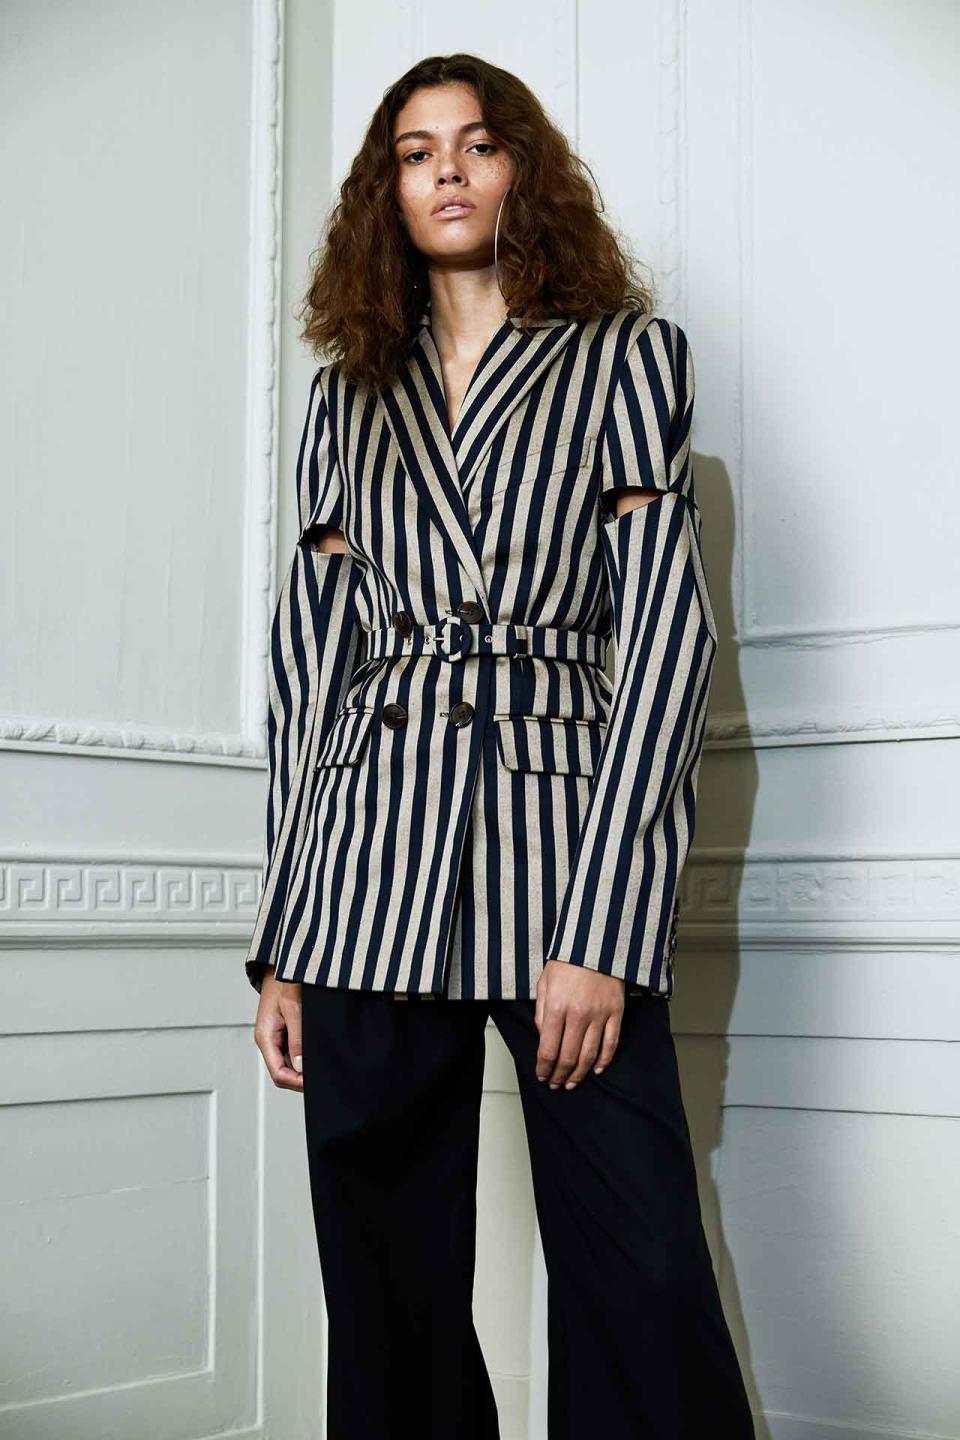 <h2>Deconstructed Tailoring</h2> <p>Speaking of tailoring, designers are deconstructing staples like blazers, dresses and pants. Whether it's a raw hem, sliced detail or remixed silhouette, Monse, Jonathan Simkhai and Brock Collection prove the freshness of an undone look.</p> <h4>Courtesy of Jonathan Simkhai</h4>